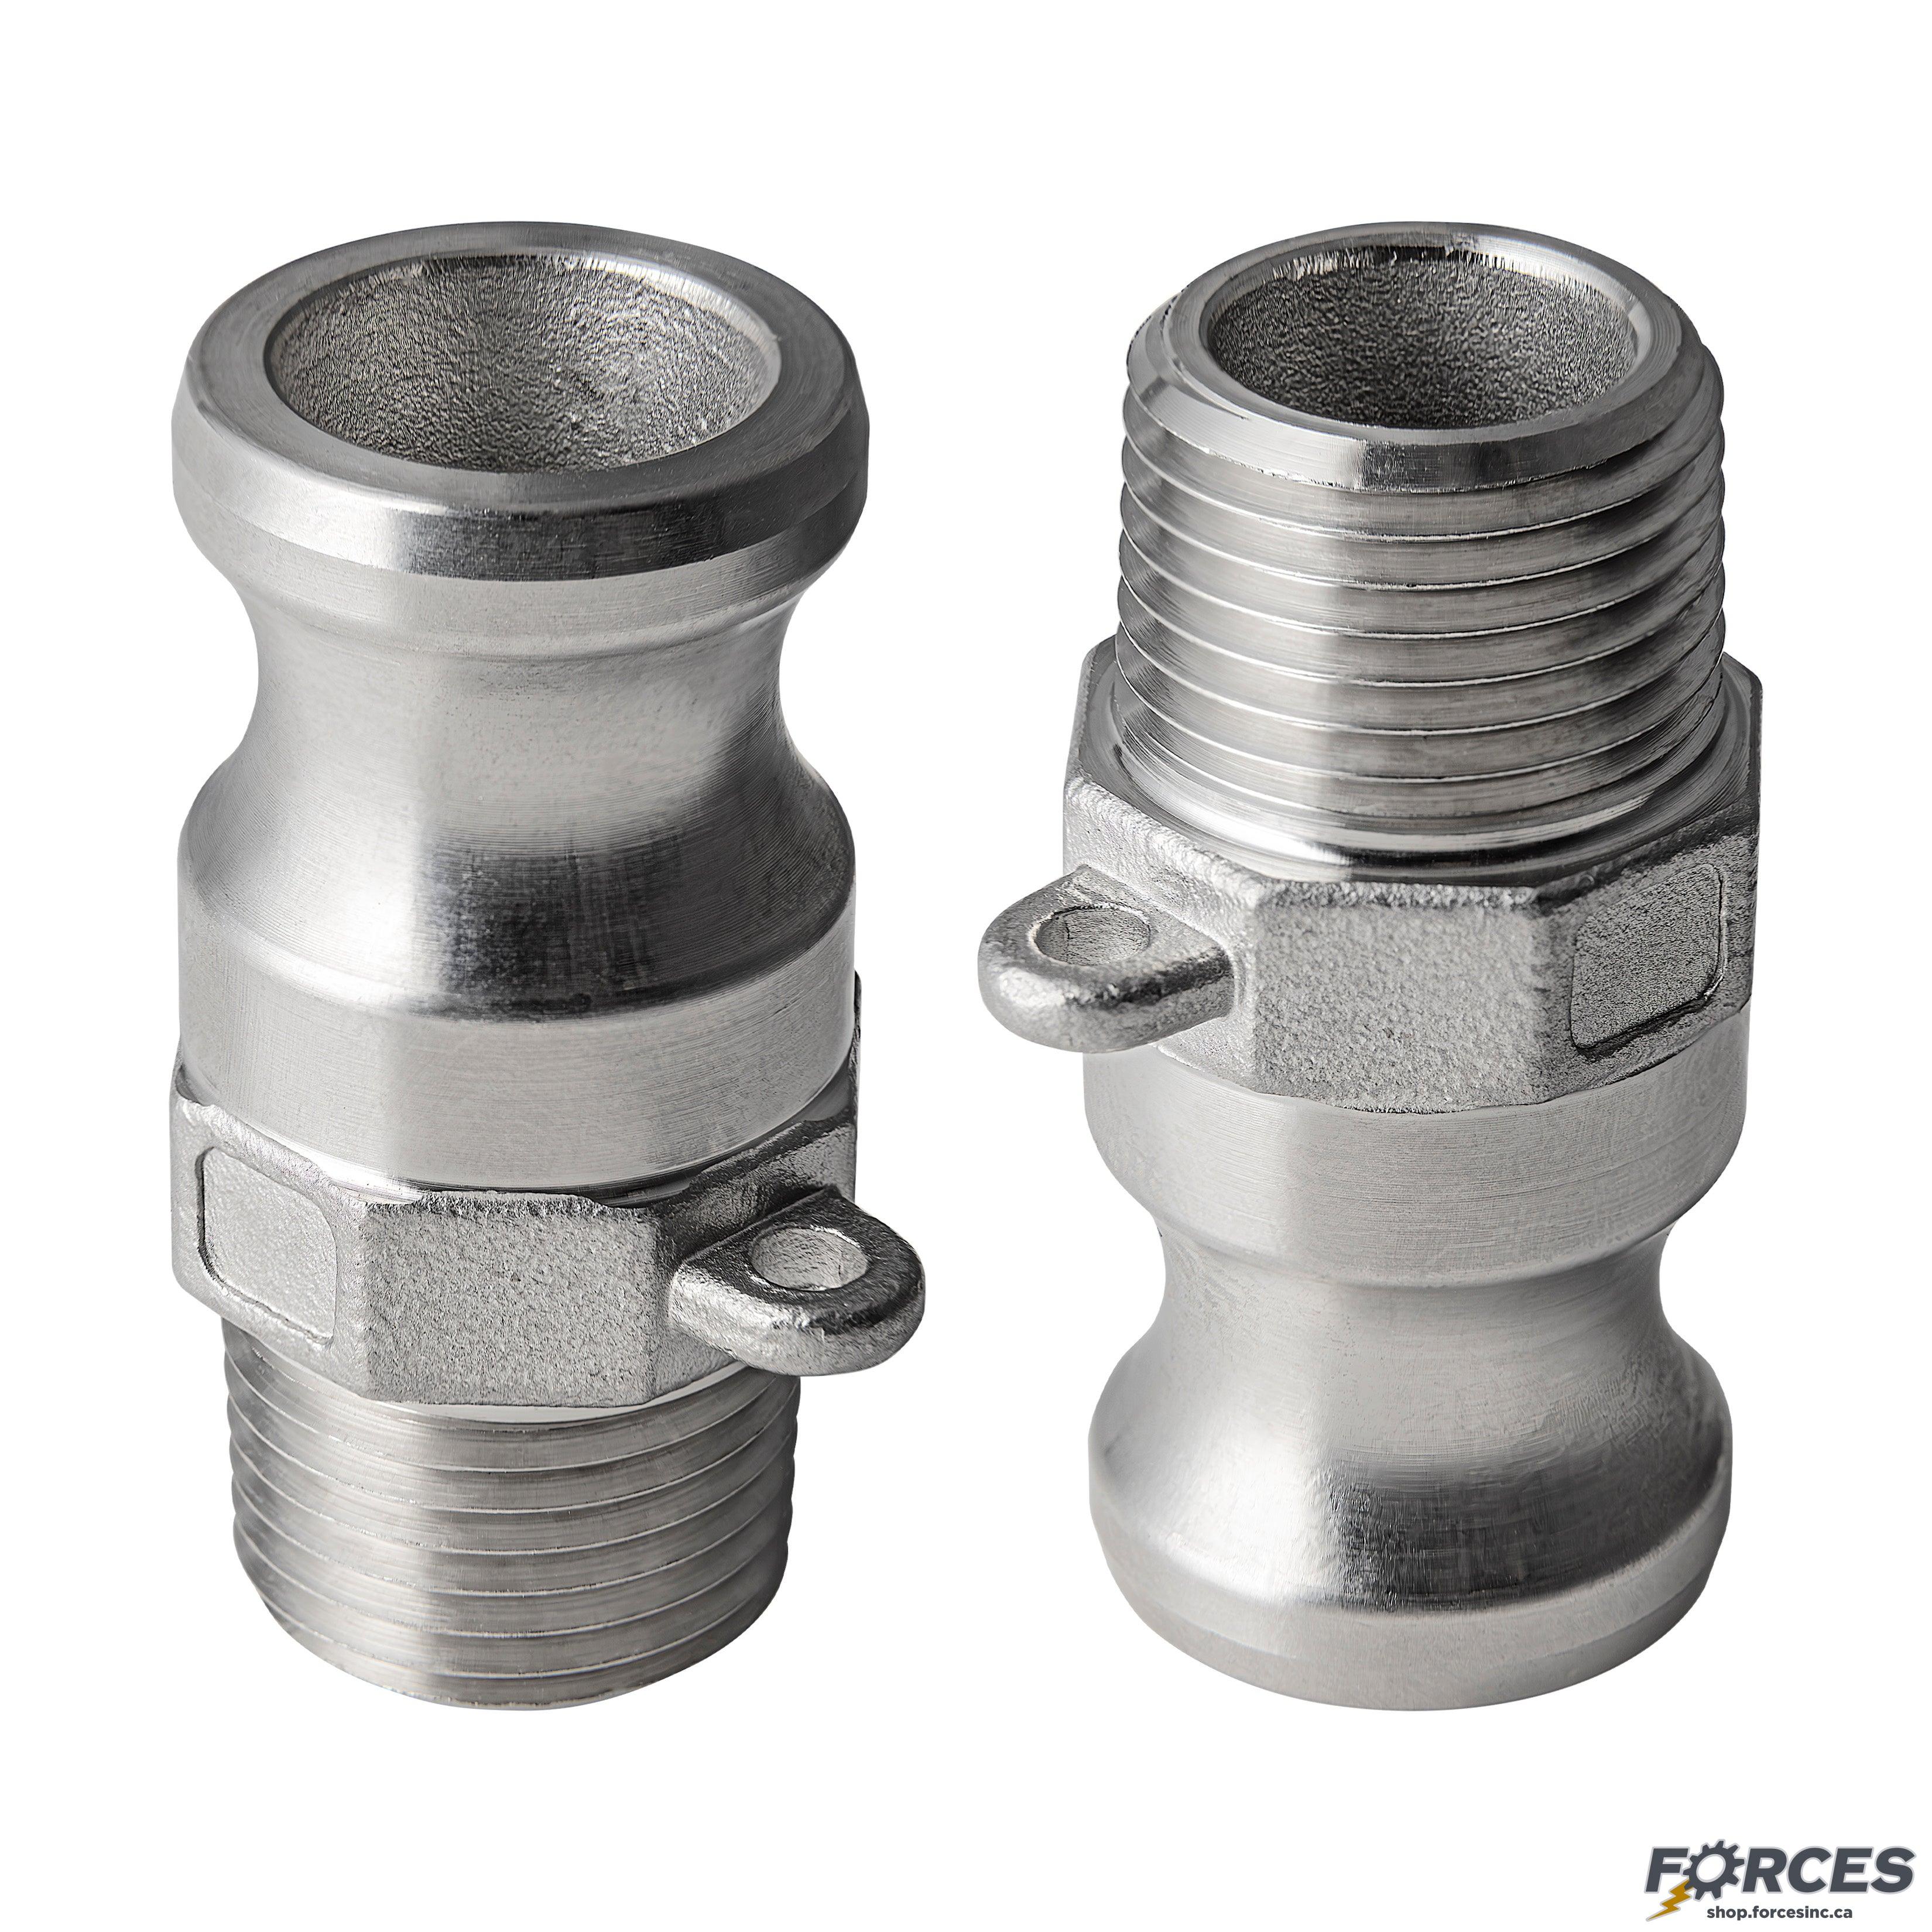 1-1/4" Type F Camlock Fitting Stainless Steel 316 - Forces Inc